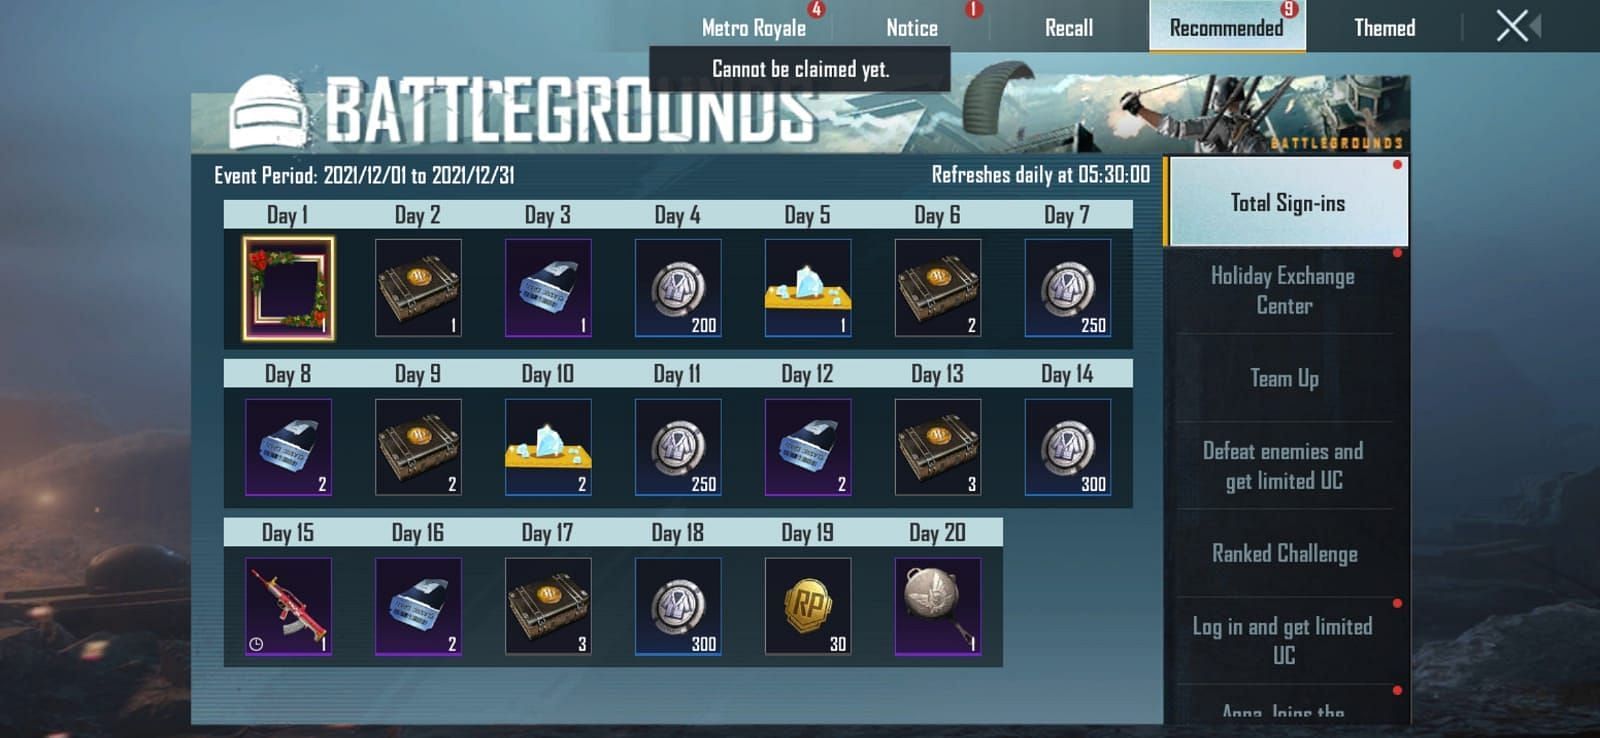 Daily log-in event(Screengrab from game)